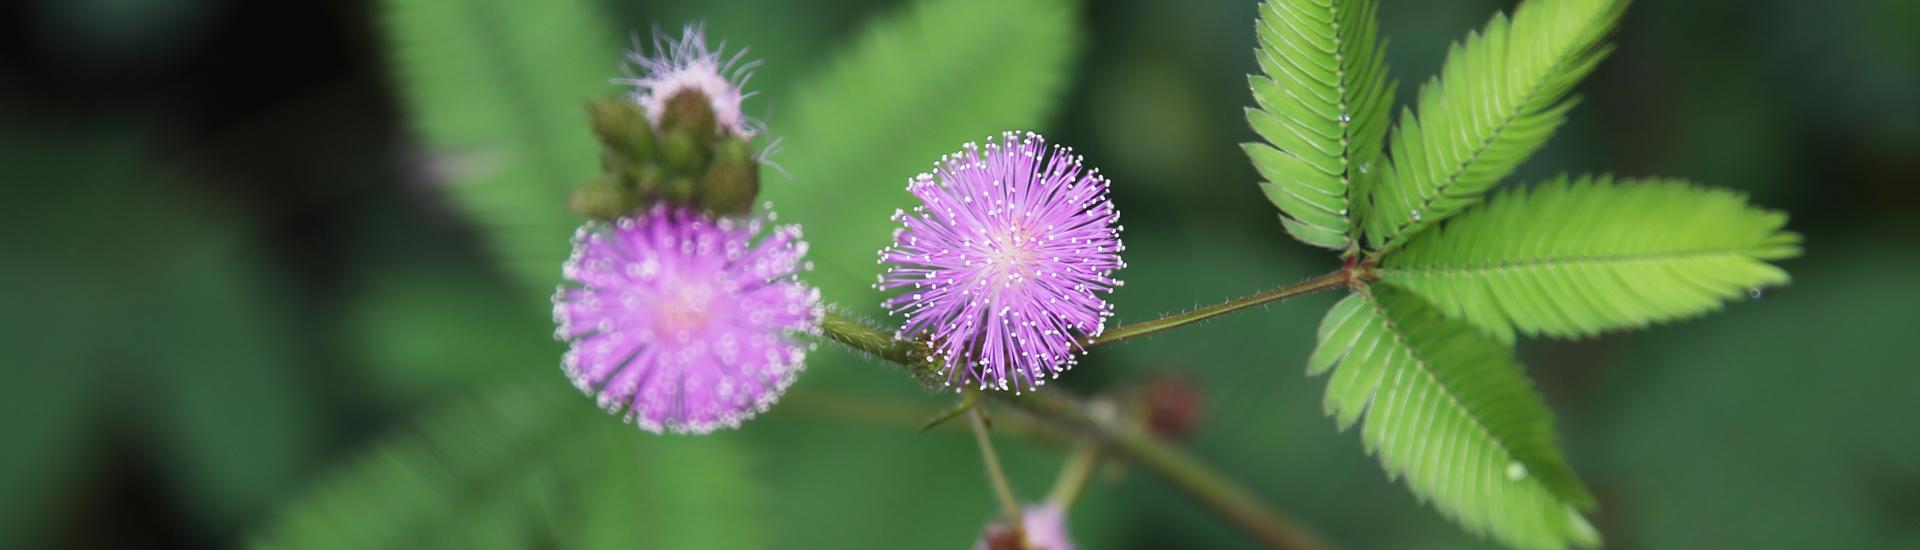 Sensitive plant leaves and flowers